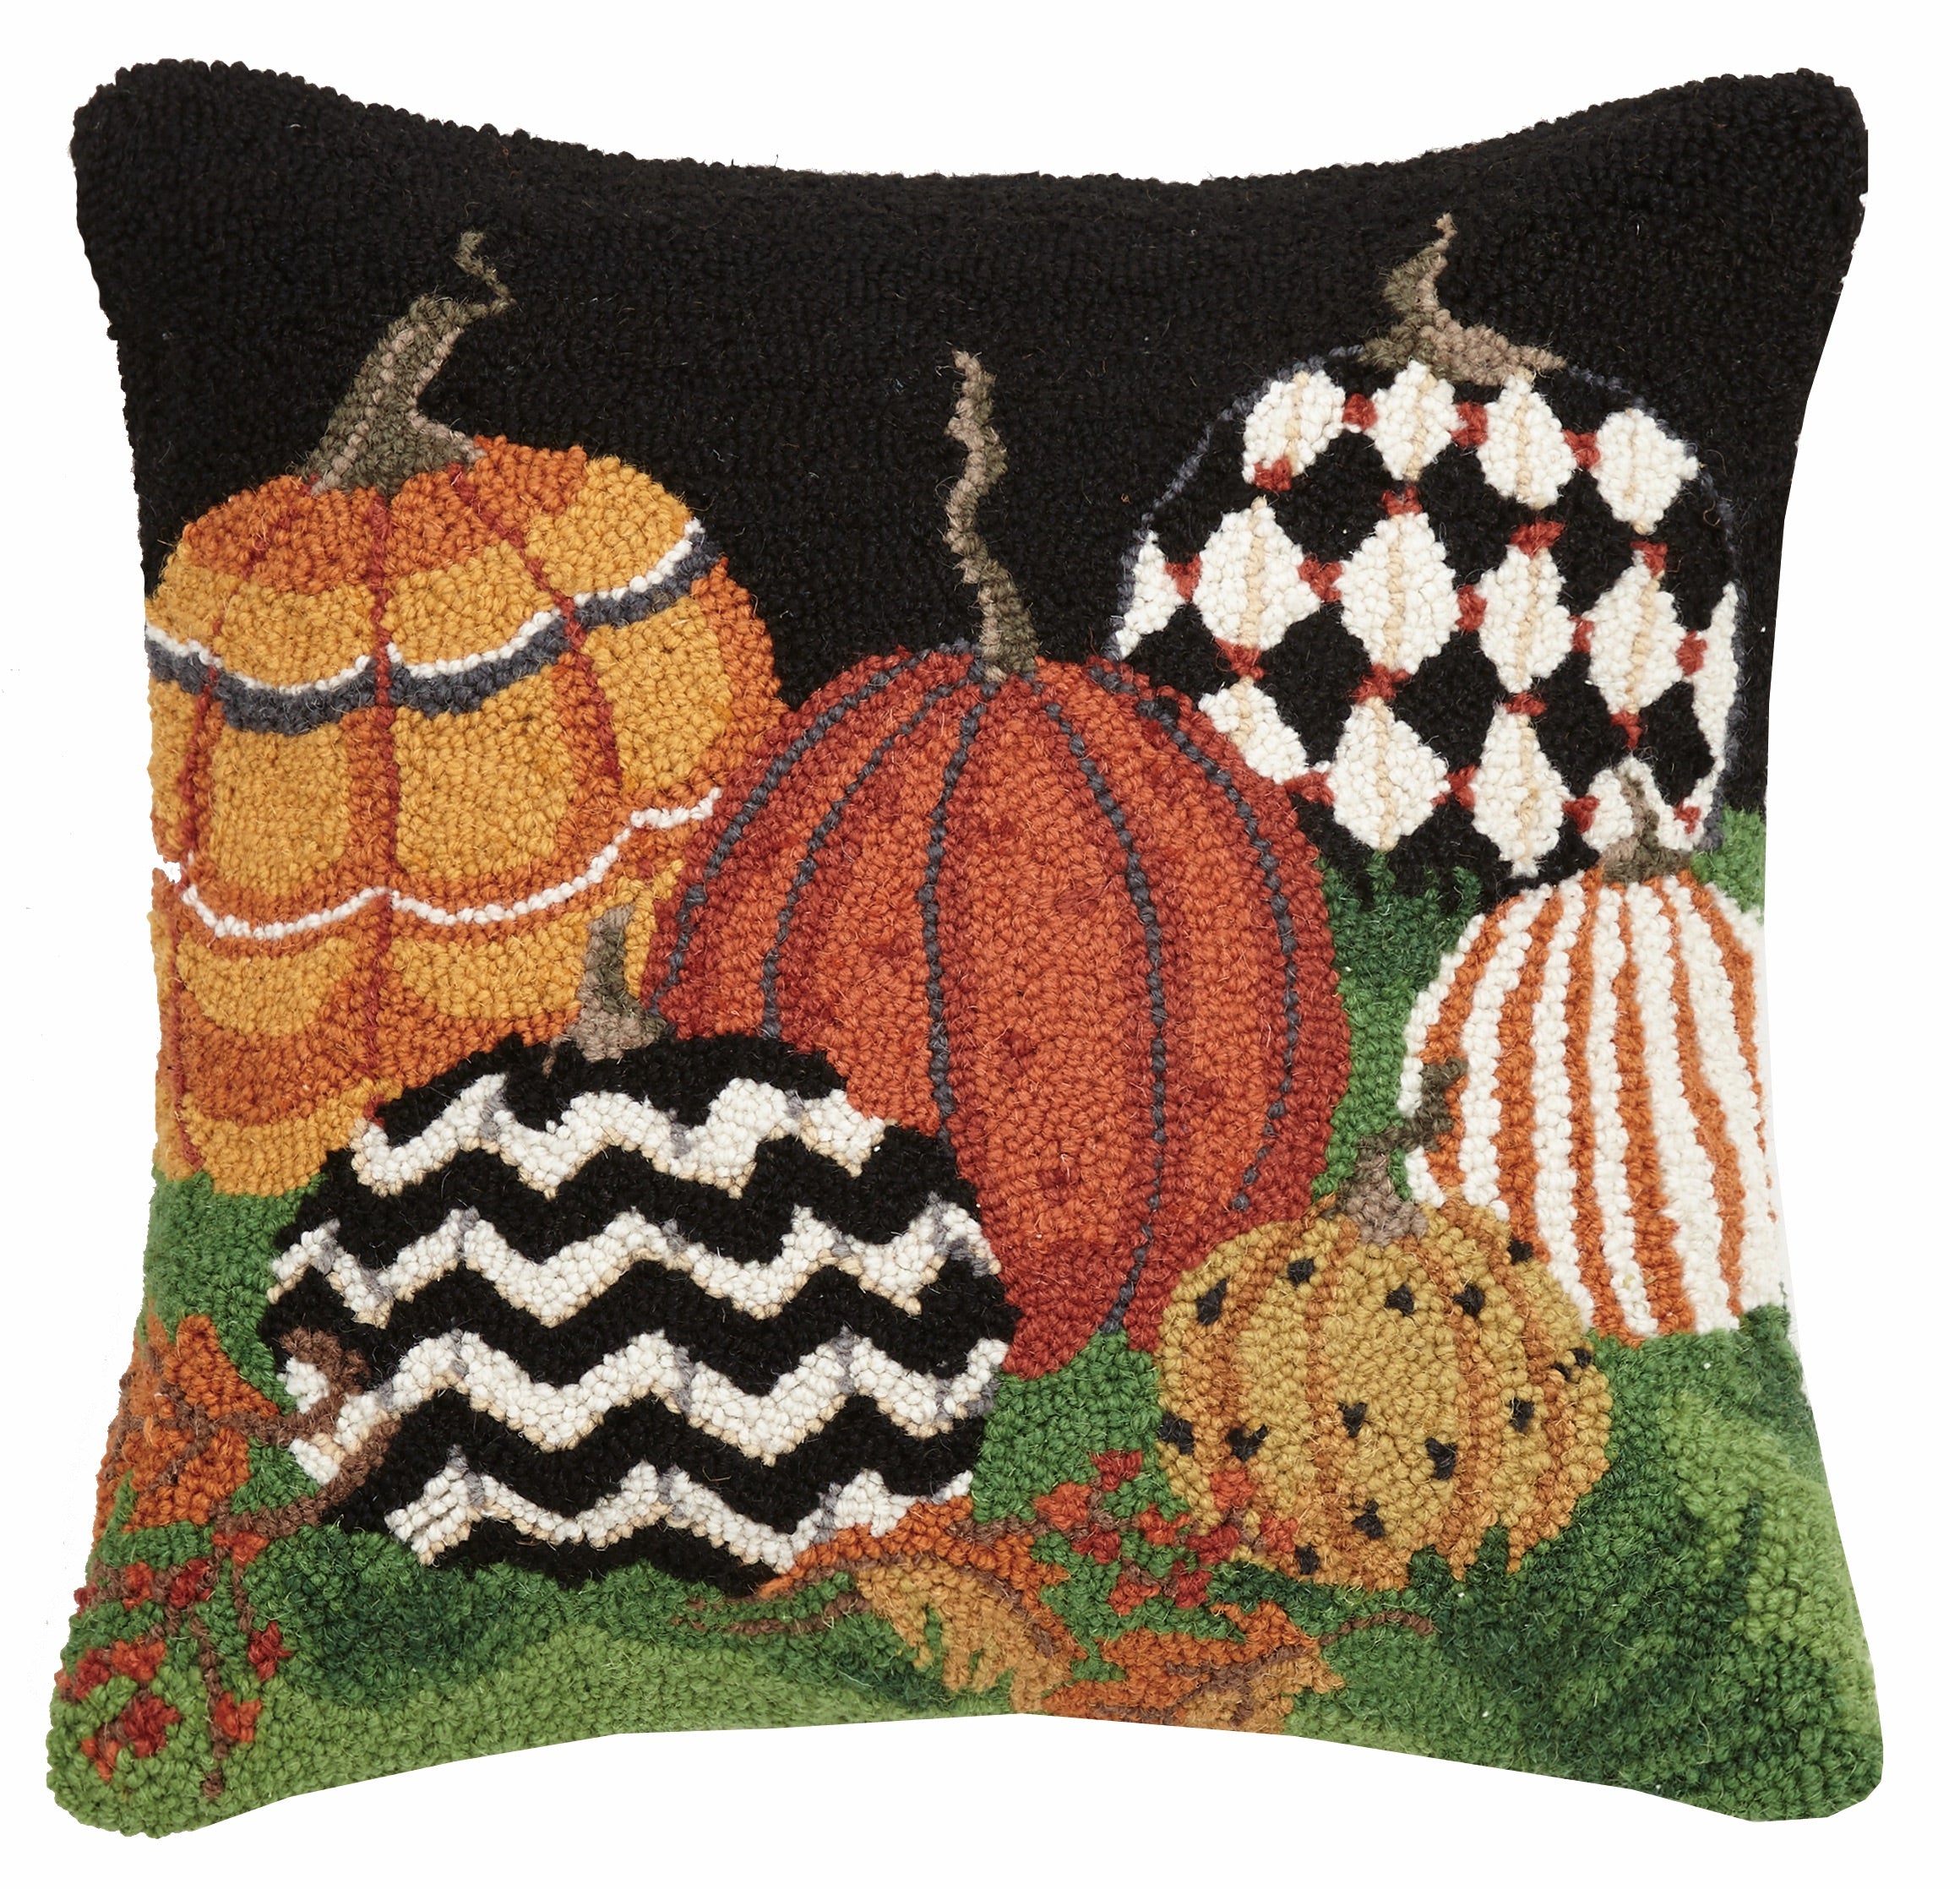 Hand-Hooked Wool Fall Leaves Throw Pillow